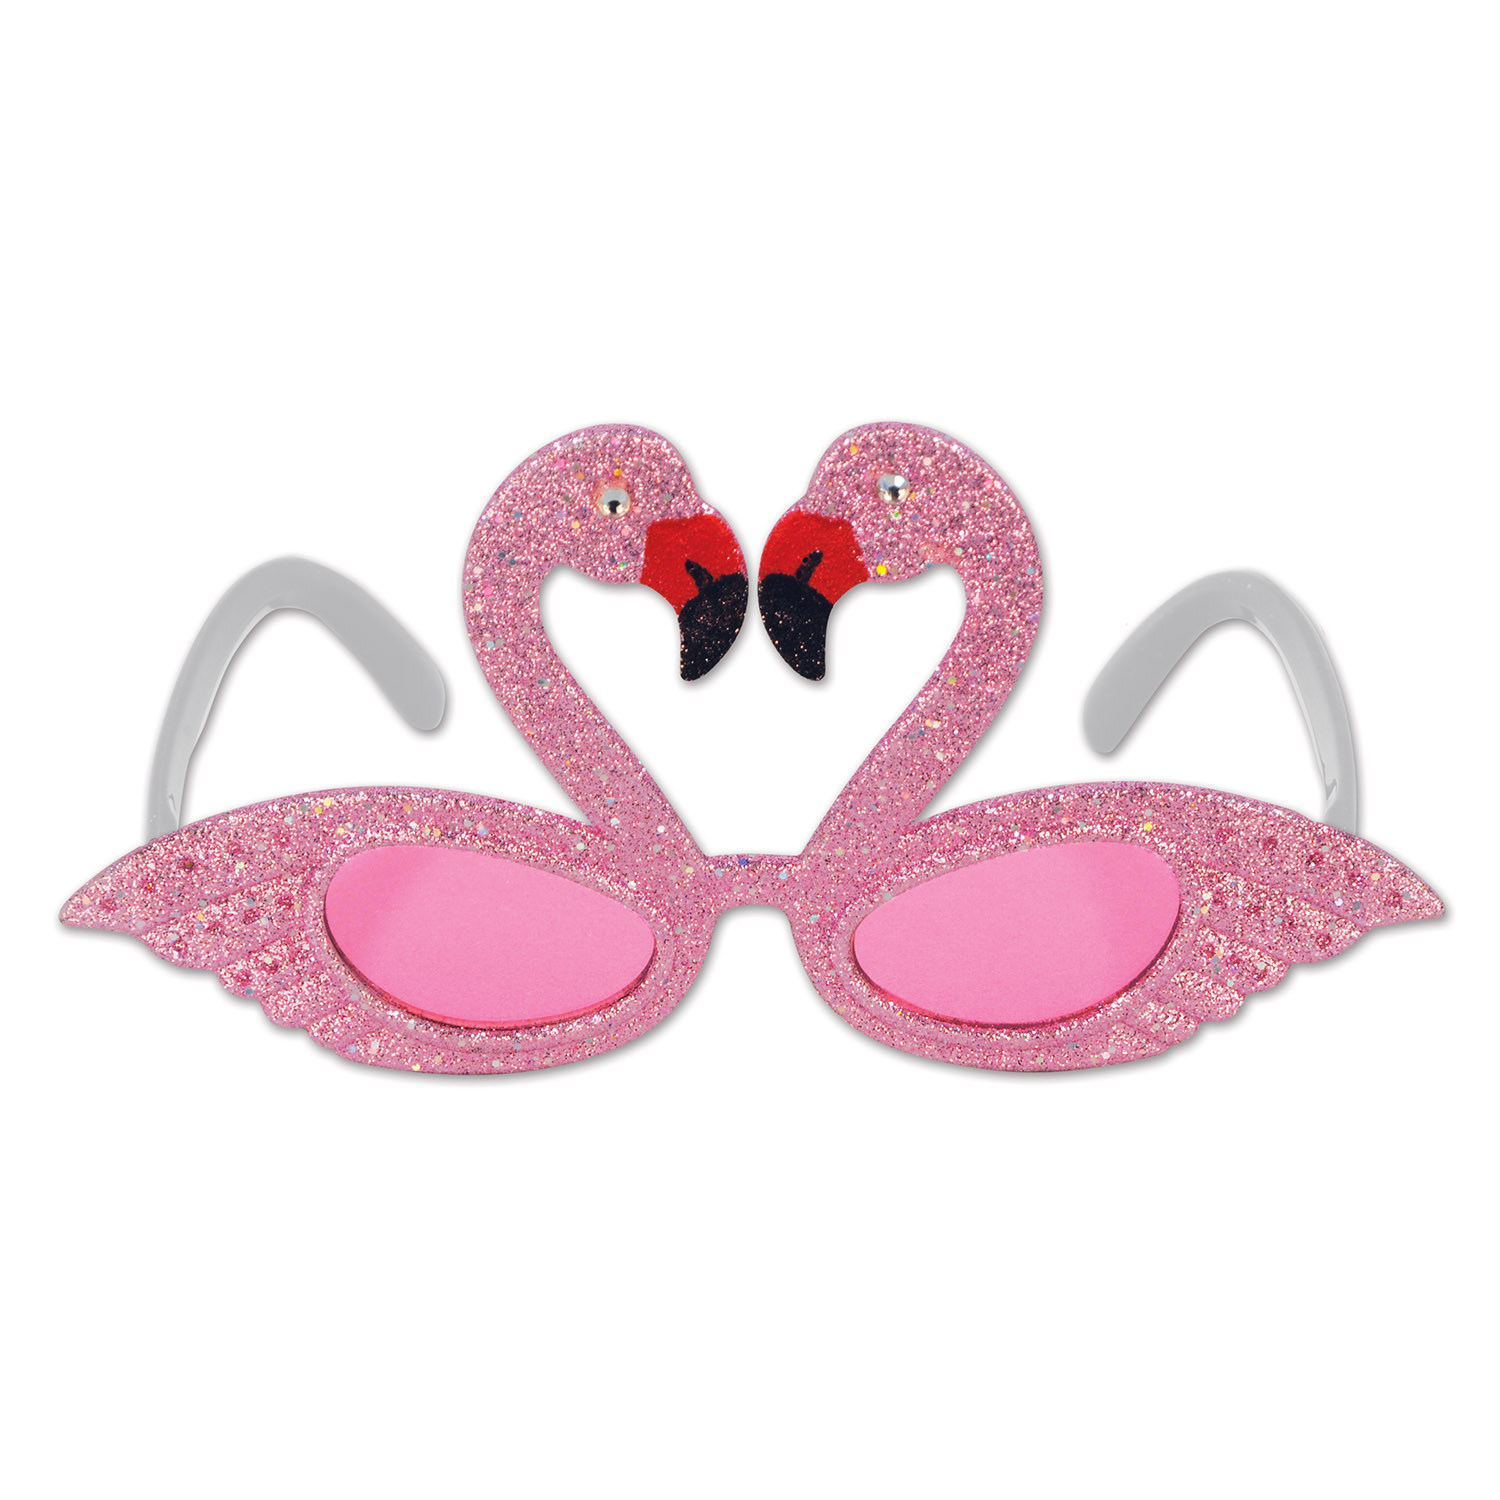 flamingo eyeglasses that are pink with glitter